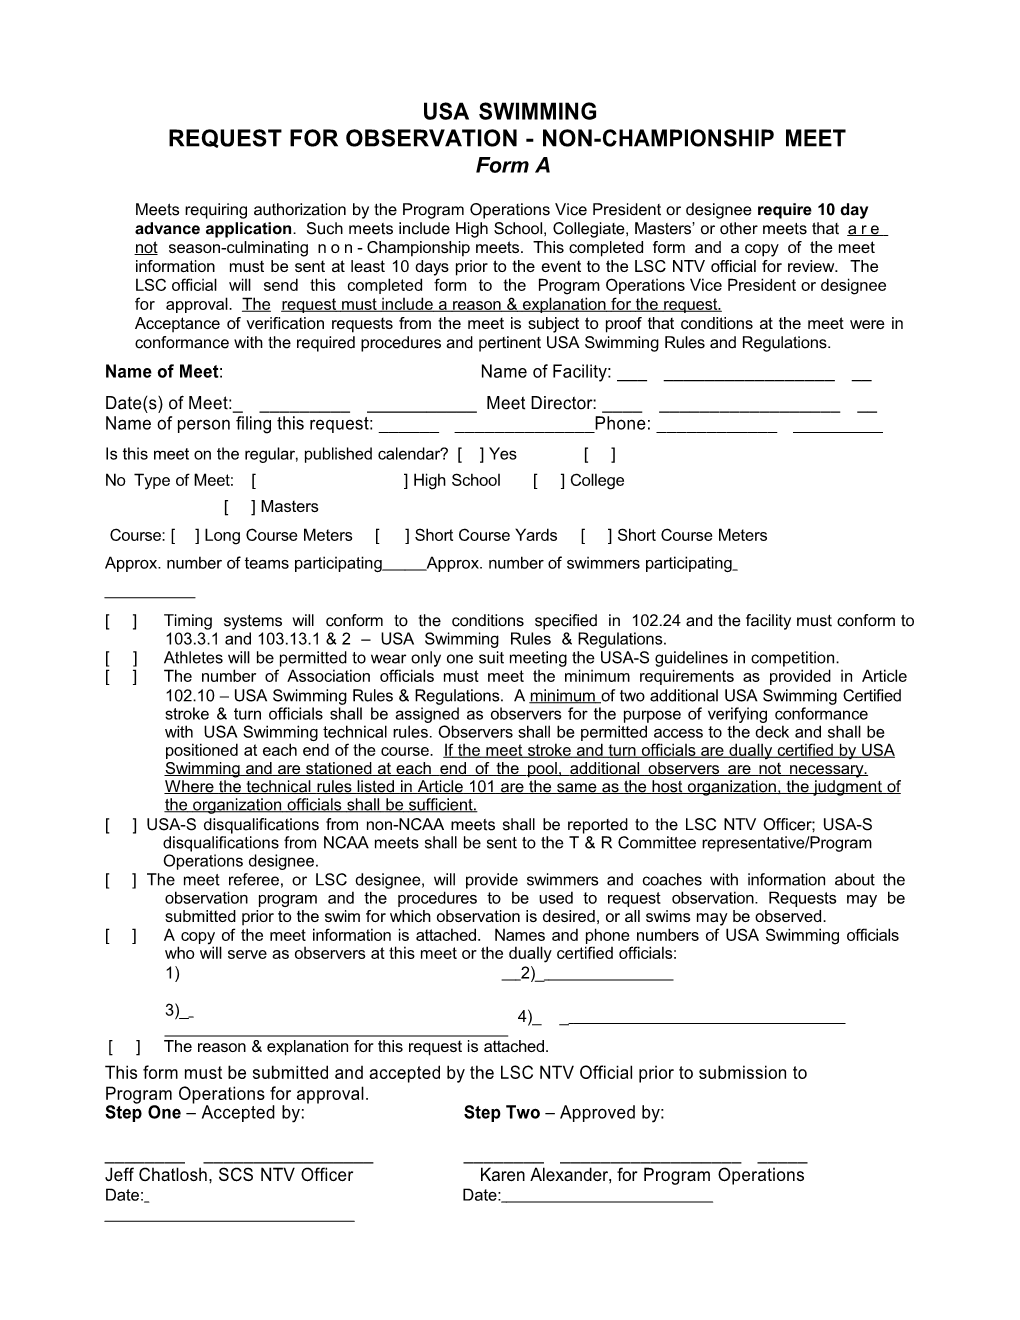 NCS Observation Request Forms a and B 2011 12